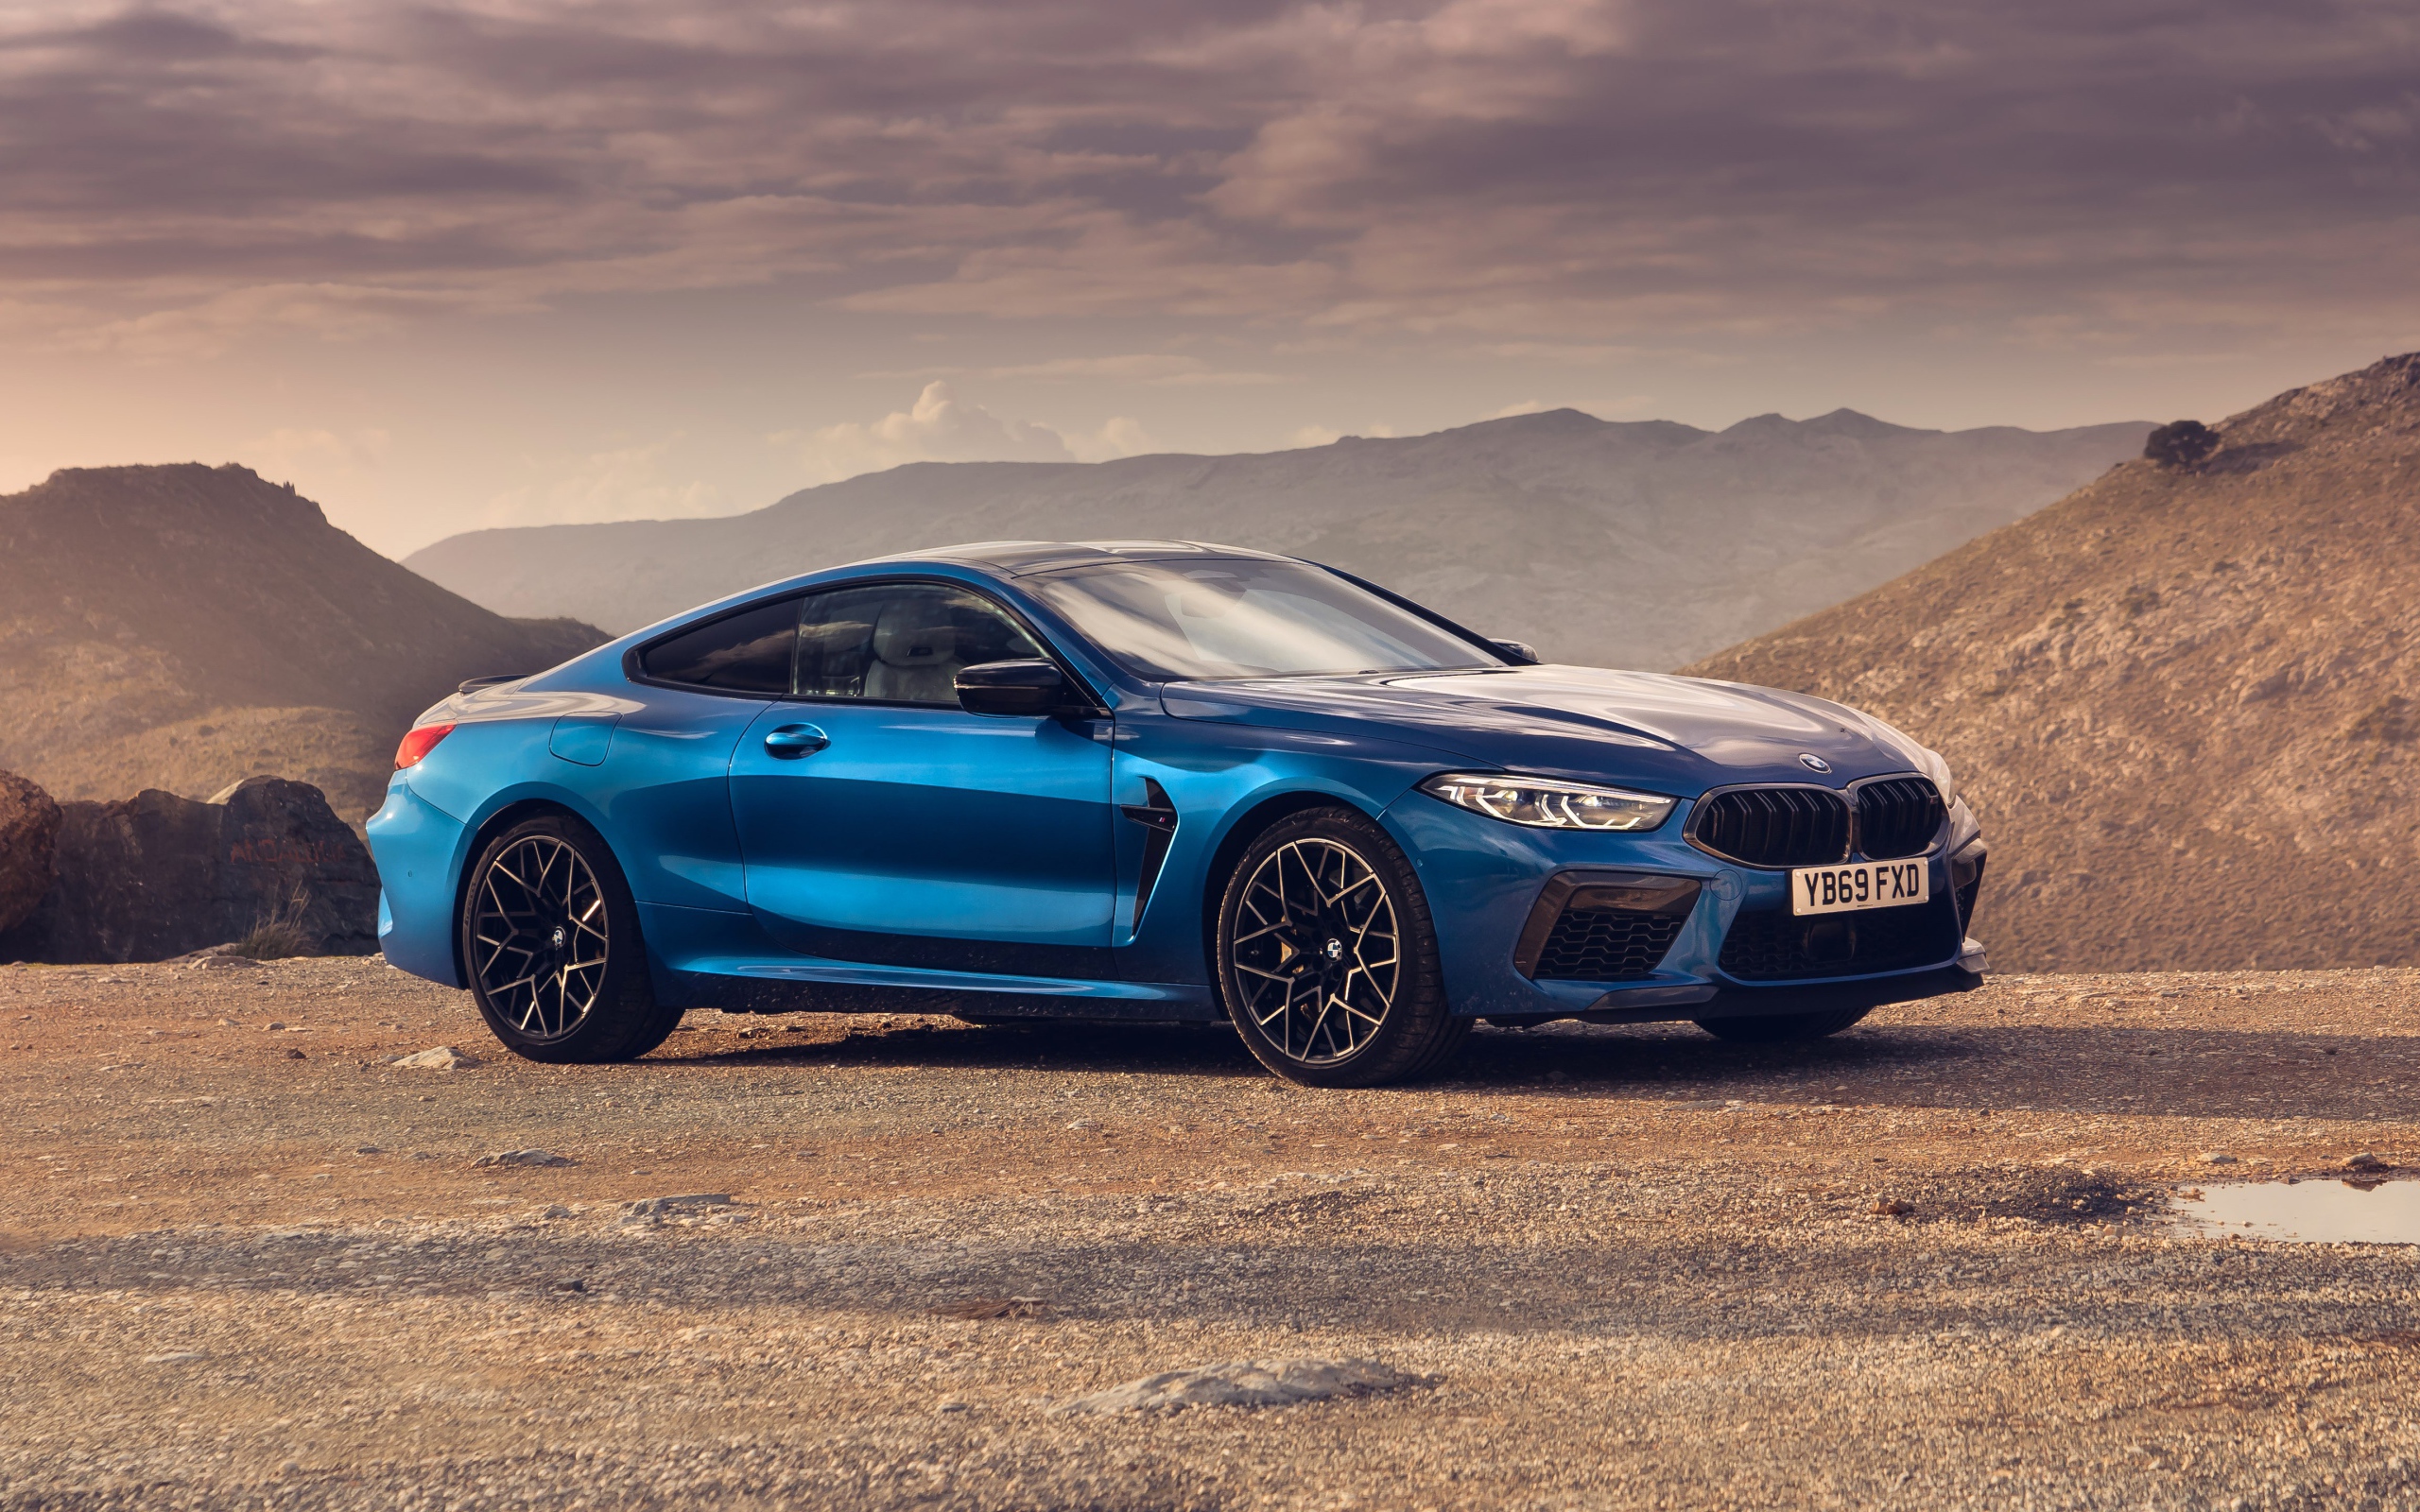 M 8 competition. BMW m8 2021. BMW m8 Competition 2021. BMW m8 Competition Coupe 2021. BMW m8 2019.